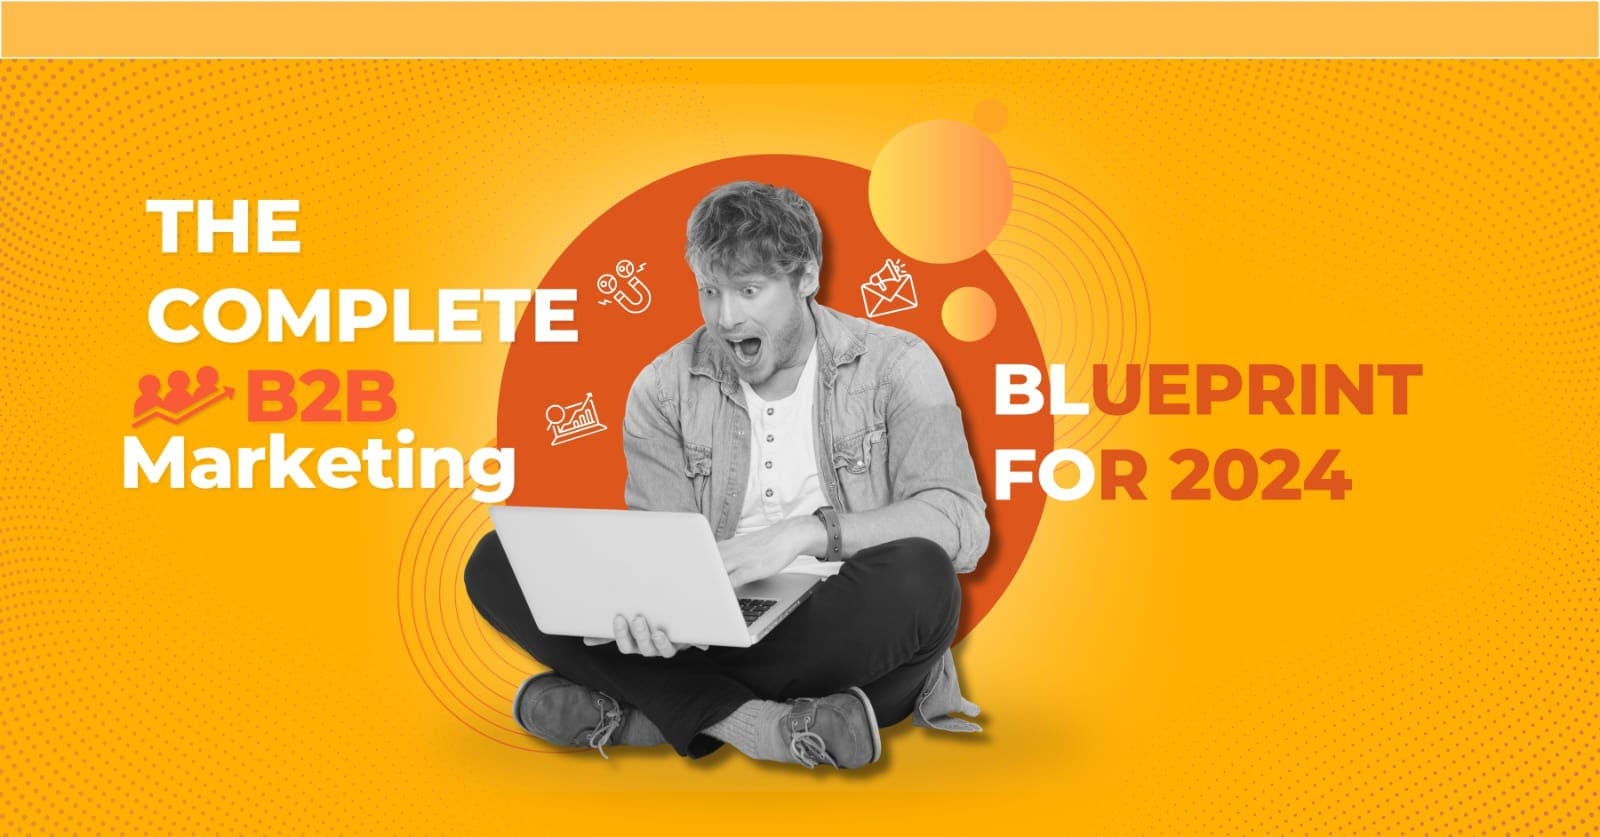 The Complete B2B Marketing Blueprint for 2024